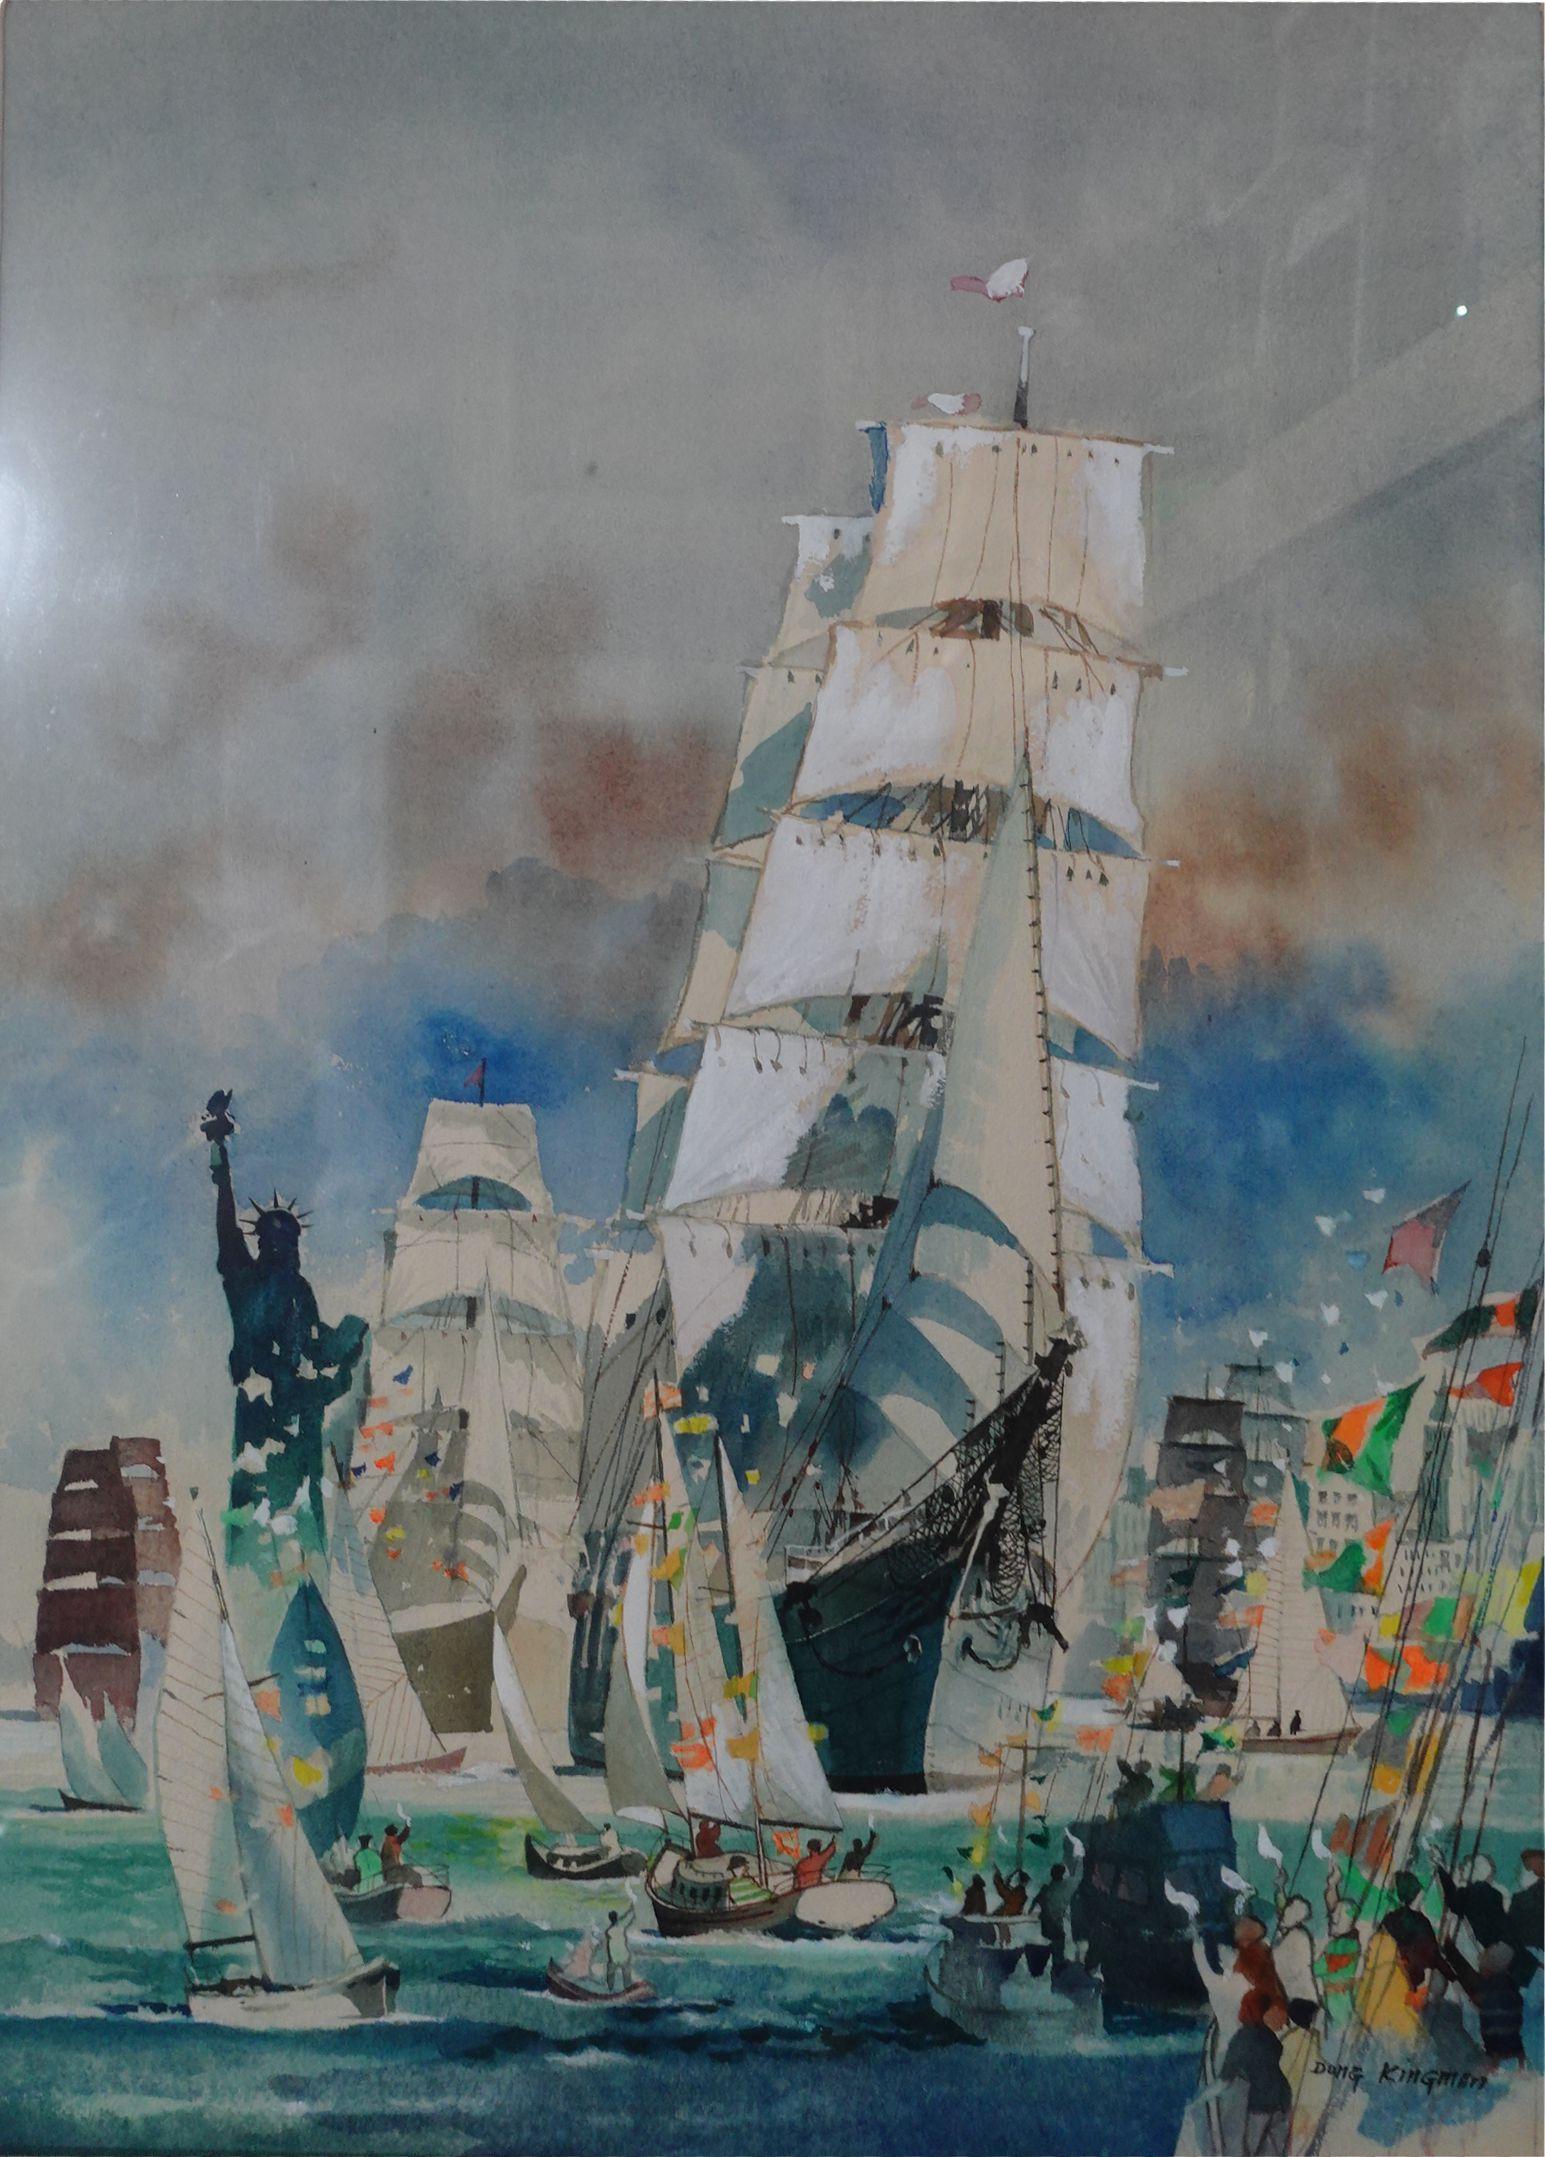 DONG MOY CHU KINGMAN (American 1911 – 2000) Chinese-American, 20th Century, Watercolor on paper “New York City Harbor Celebration Statue of Liberty Flotilla— “Operation Sail” 1976.” Signed lower right: “Dong Kingman” H. 28” x W. 21”. Framed under